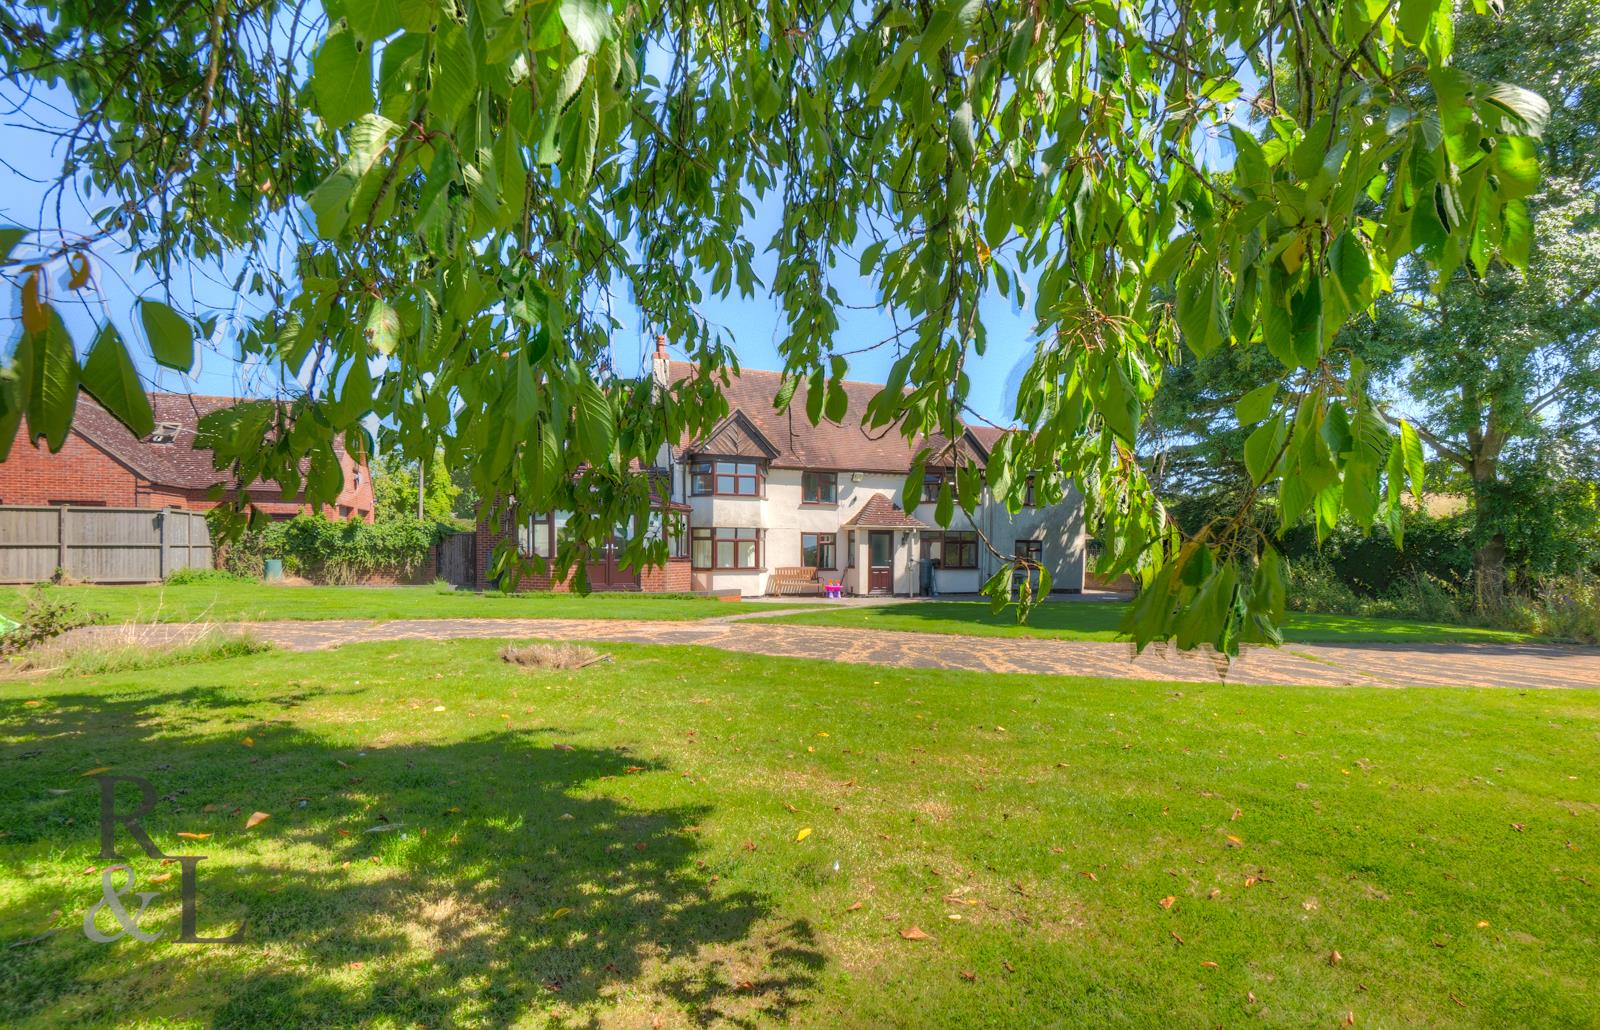 Property image for Appleby Hill, Austrey, Atherstone